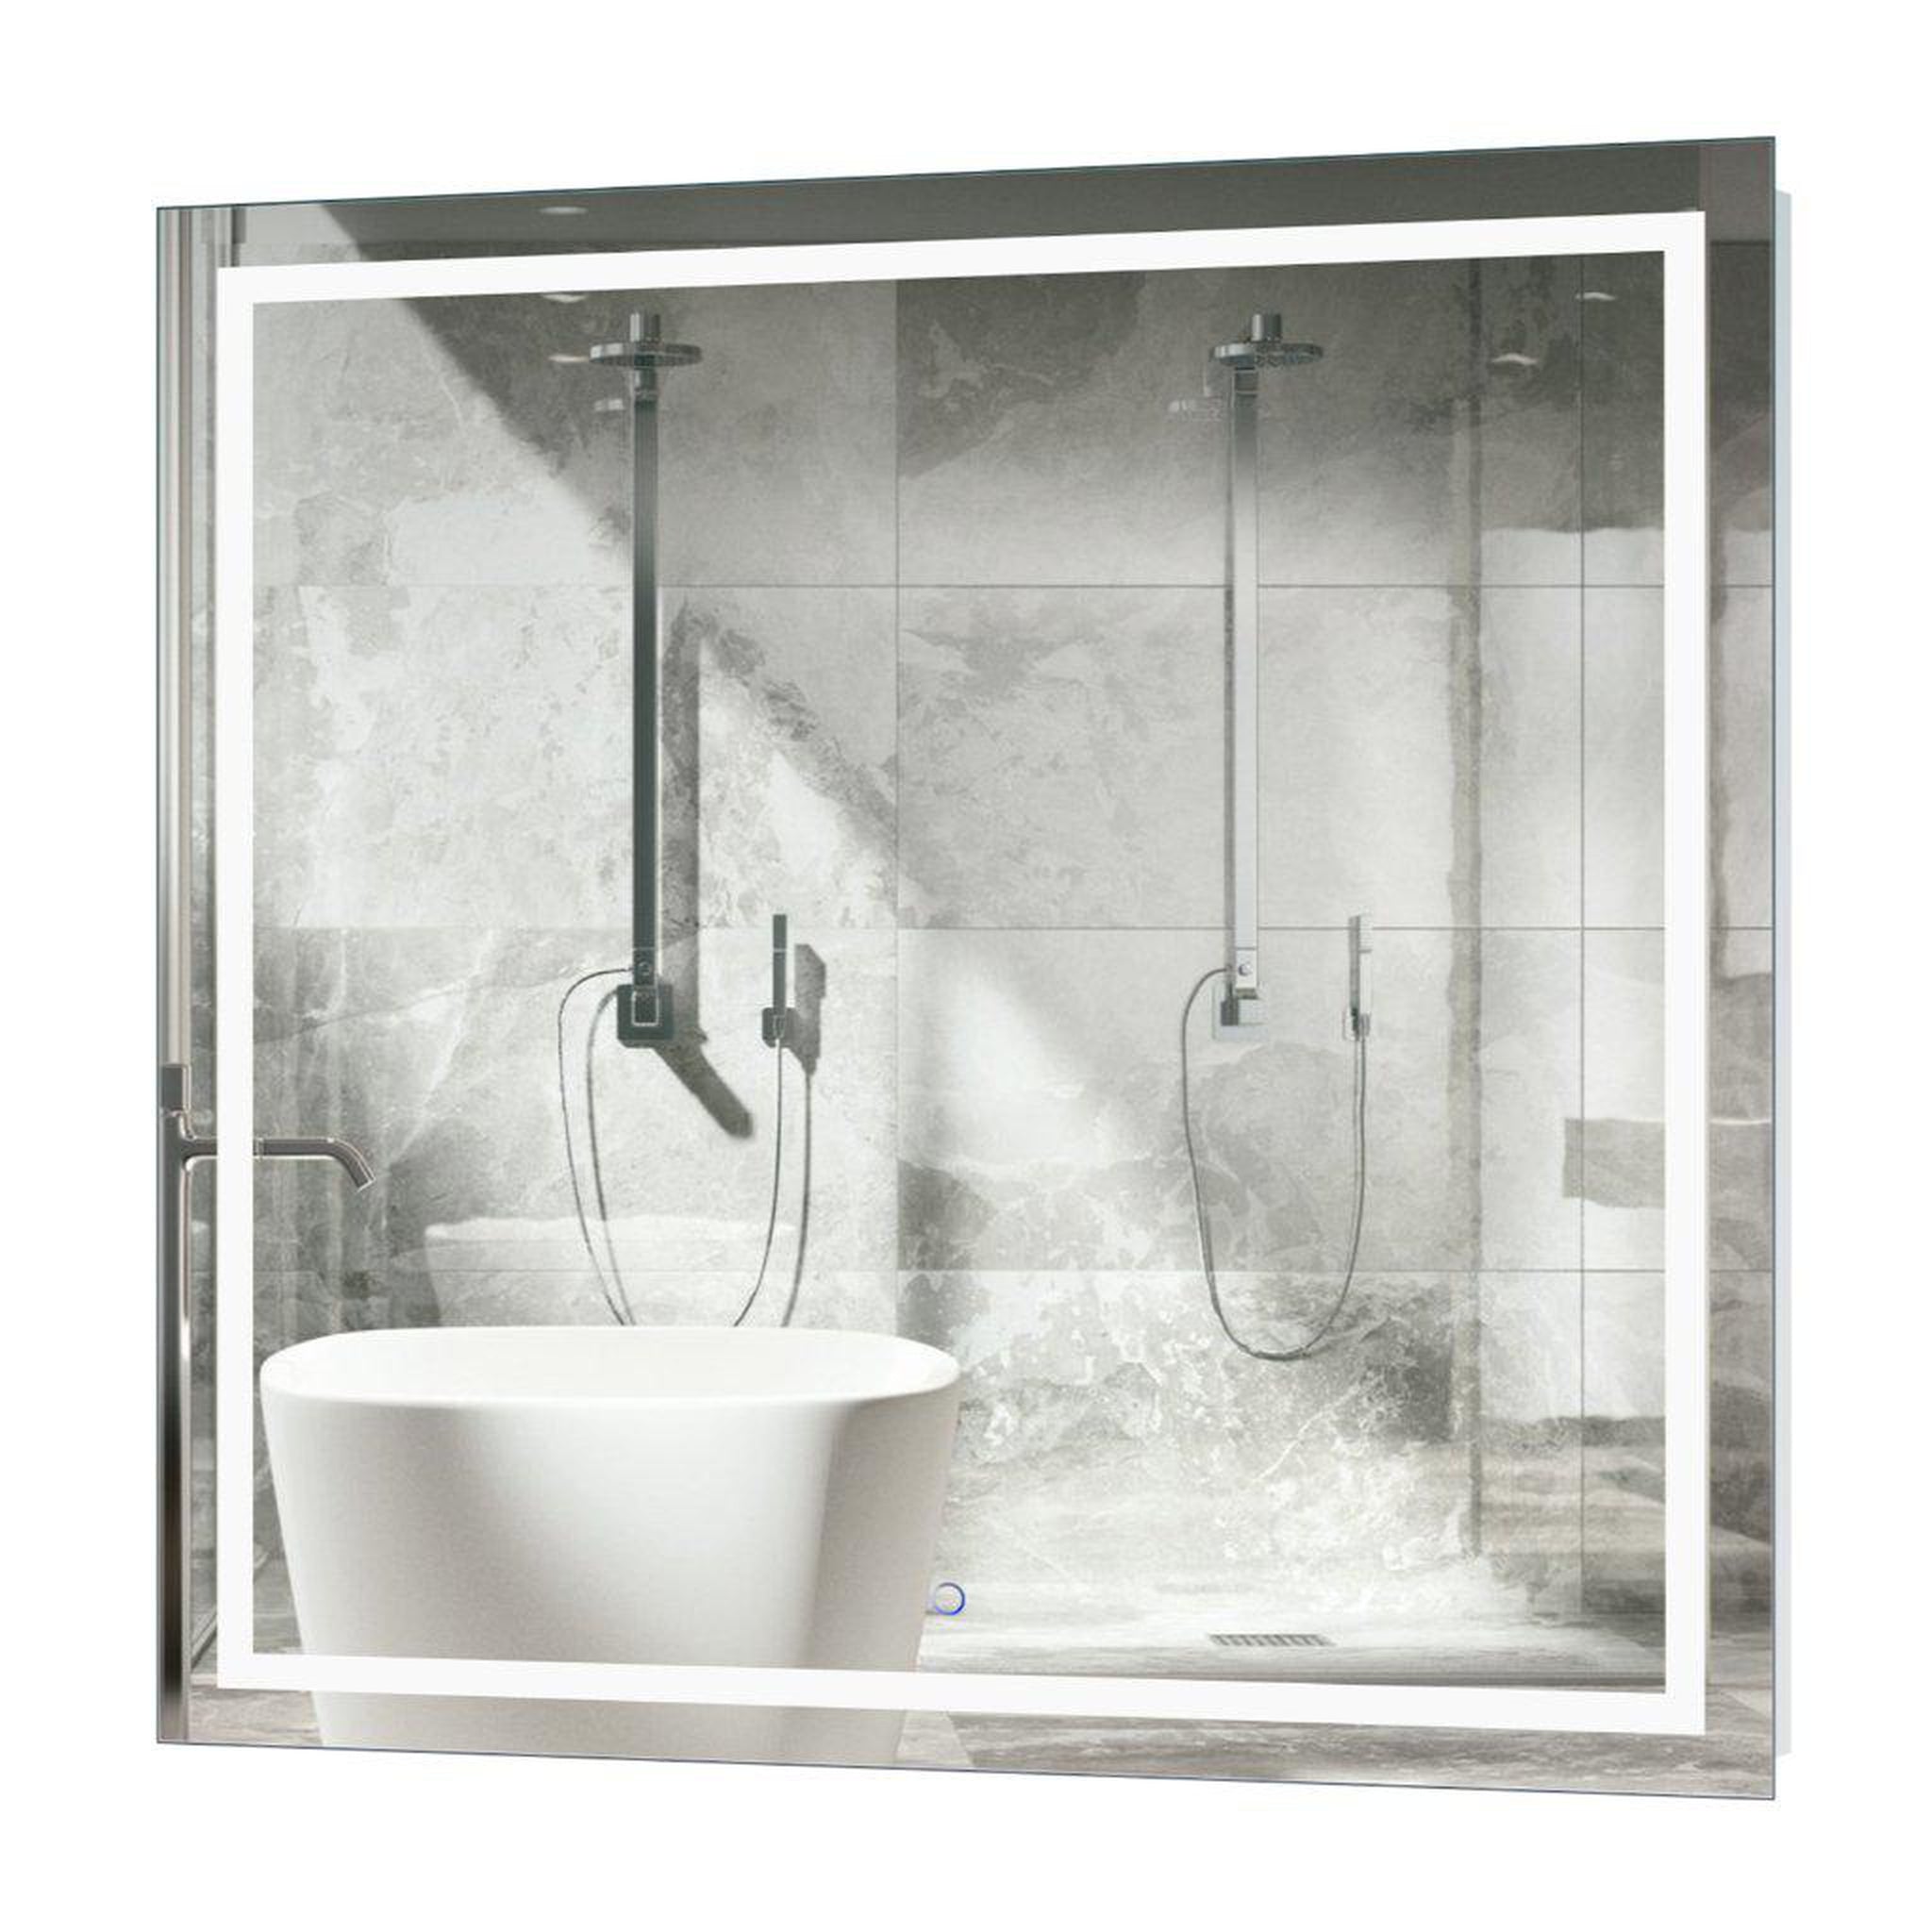 Krugg Reflections, Krugg Reflections Icon 42” x 42” 5000K Square Wall-Mounted Illuminated Silver Backed LED  Mirror With Built-in Defogger and Touch Sensor On/Off Built-in Dimmer